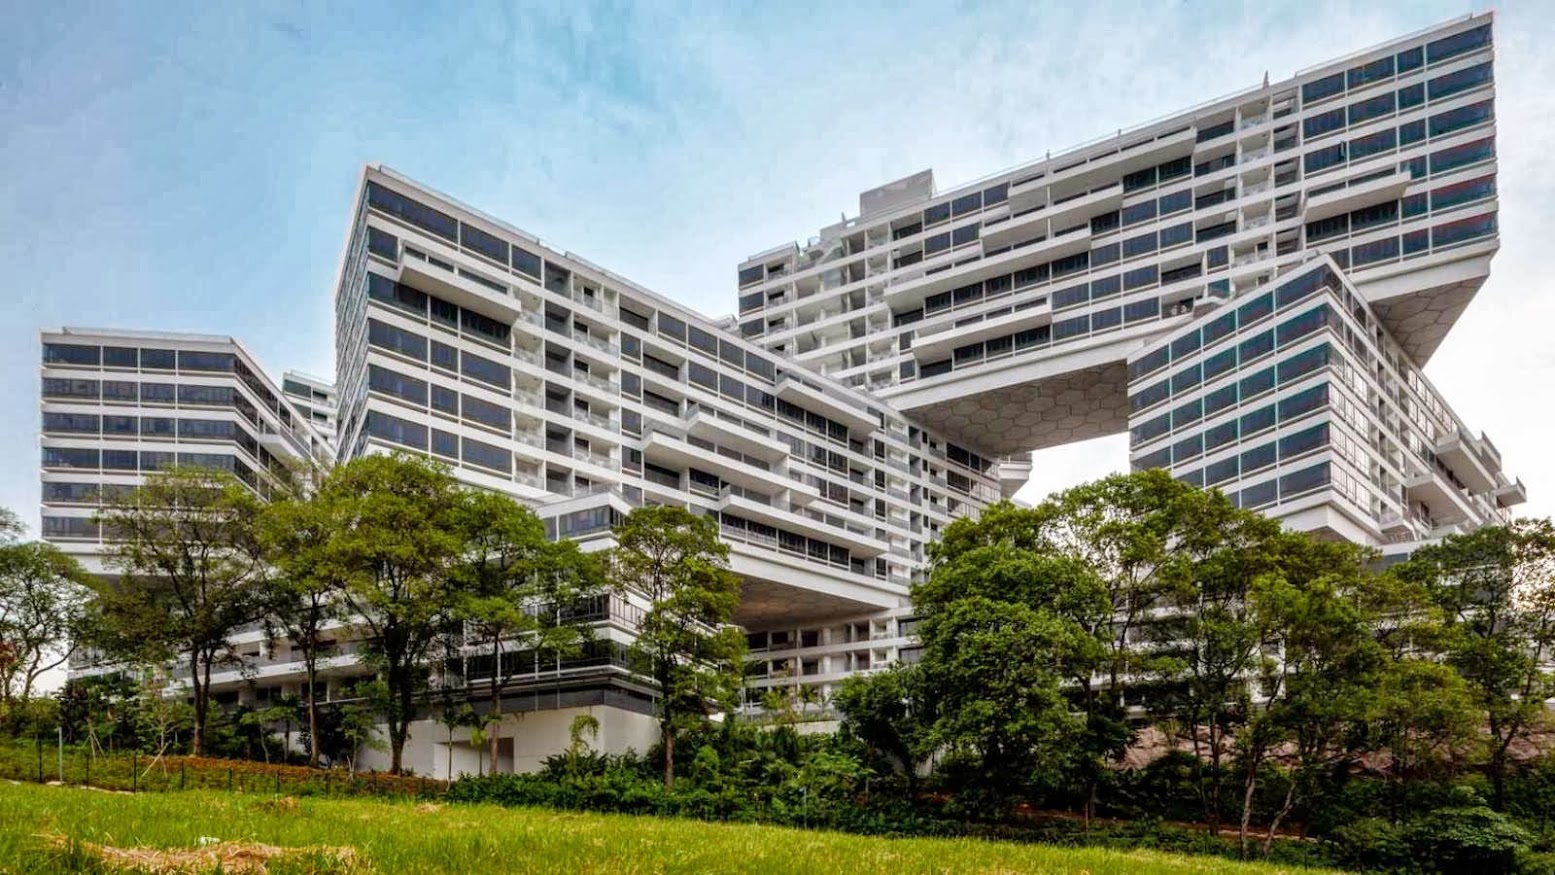 Singapore: [THE INTERLACE BY OMA]